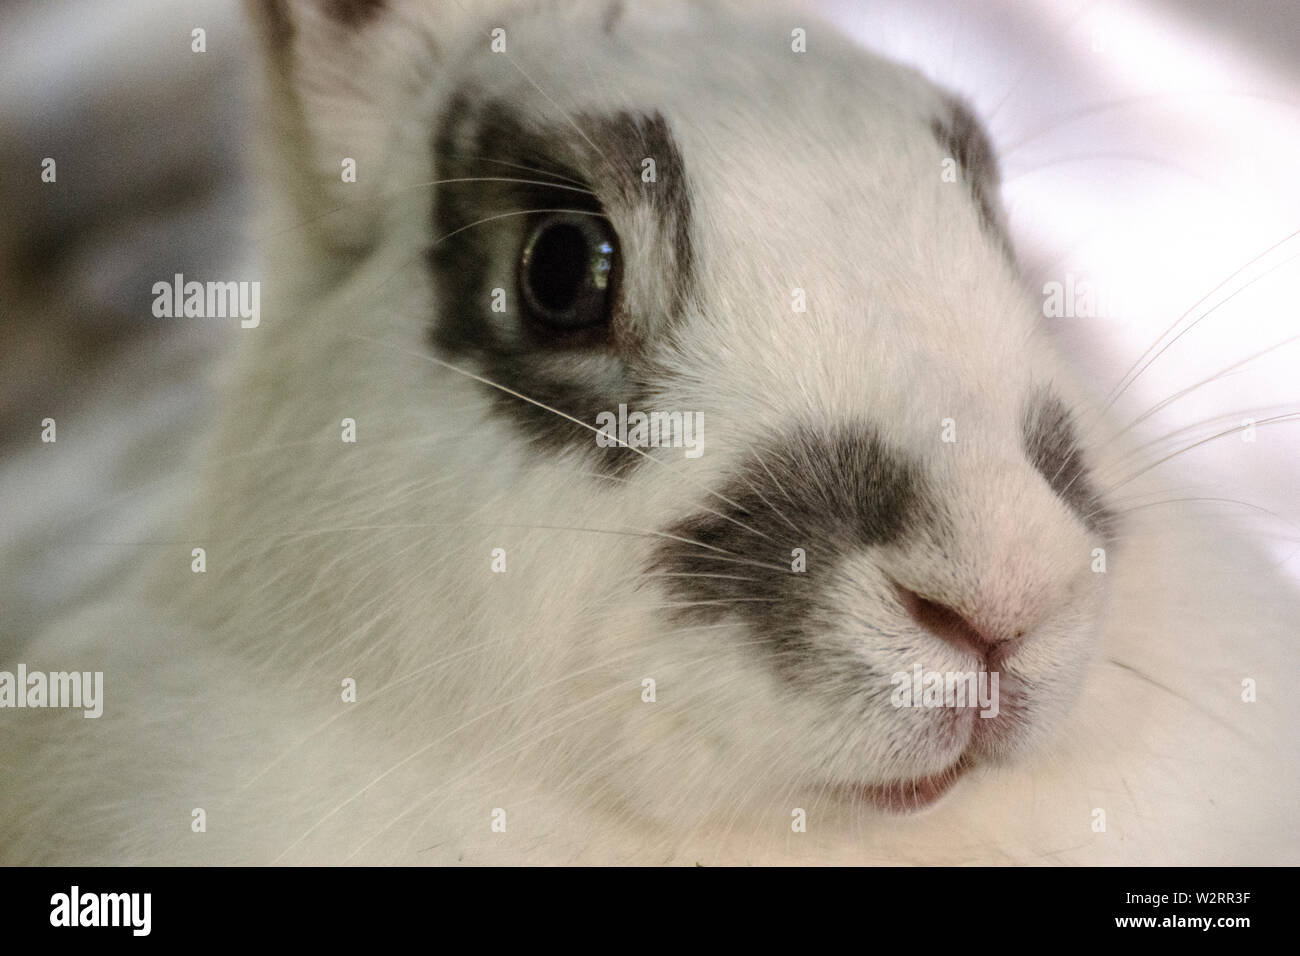 Portrait of a young white and grey rabbit pet. Close up photo shoot. Stock Photo